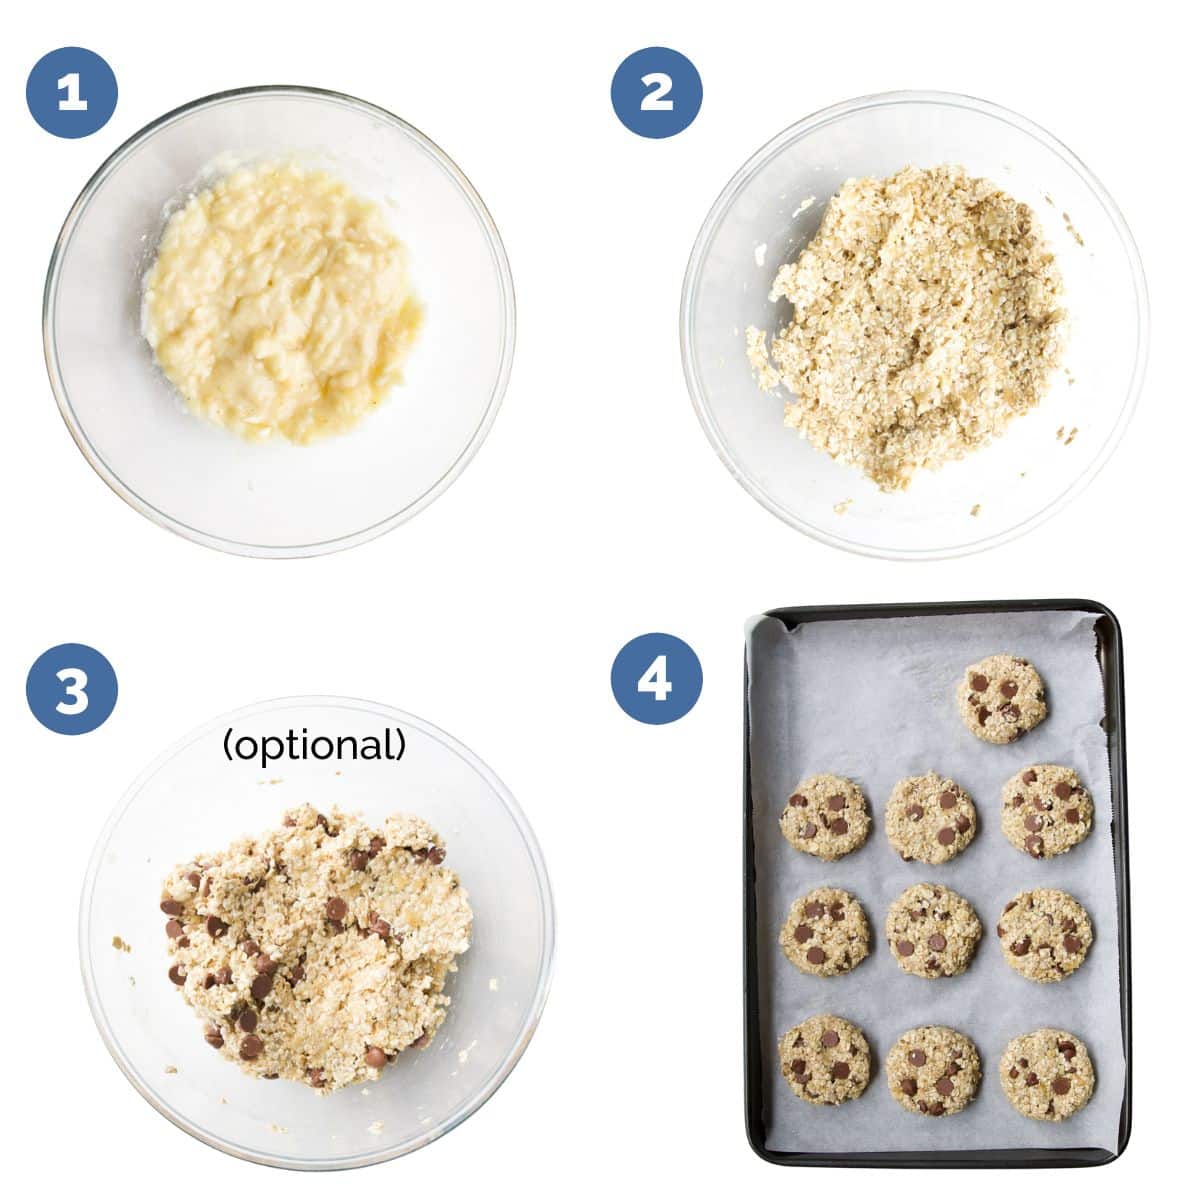 Collage of 4 Images Showing How to Make Banana Oatmeal Cookies. 1 Mashed Banana in Bowl 2 Mashed Banana Mixed with Oats 3 Optional Choc Chips Mixed In 4 Cookies formed on Baking Sheet. 